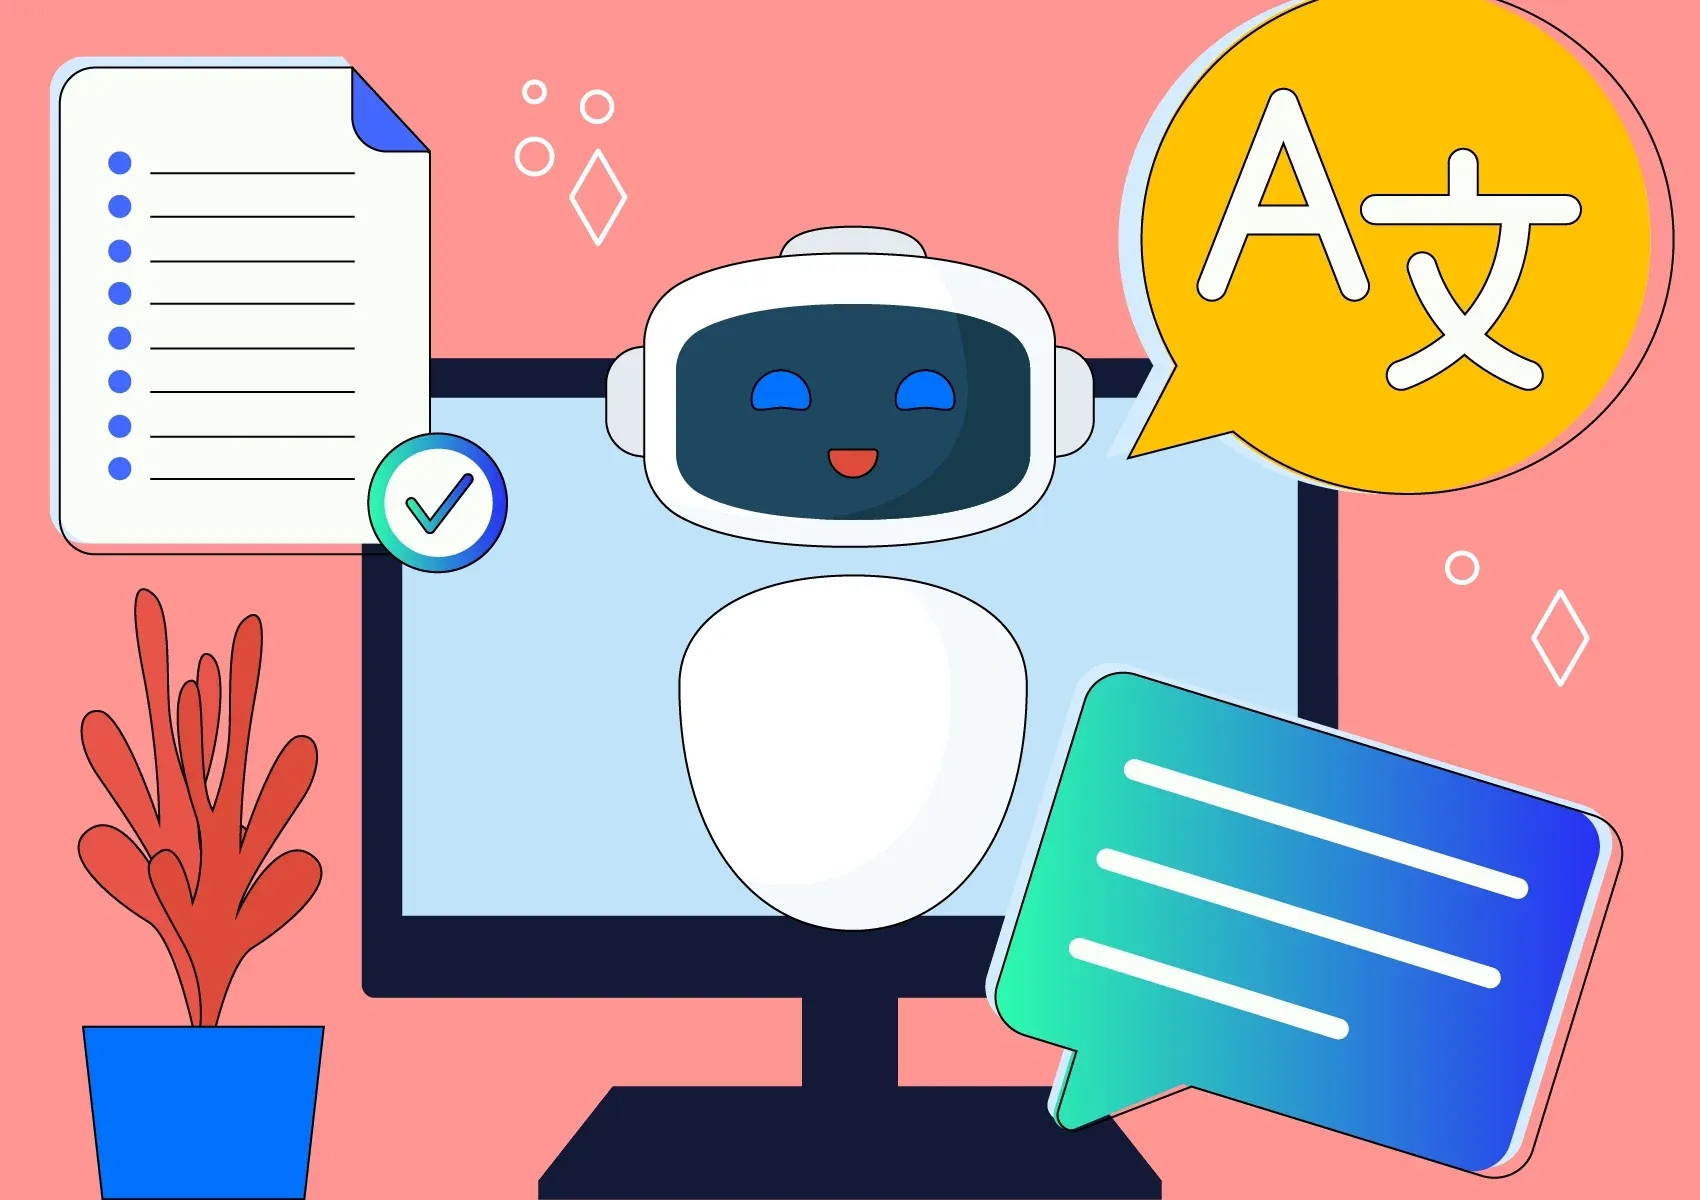 how to develop chatbots